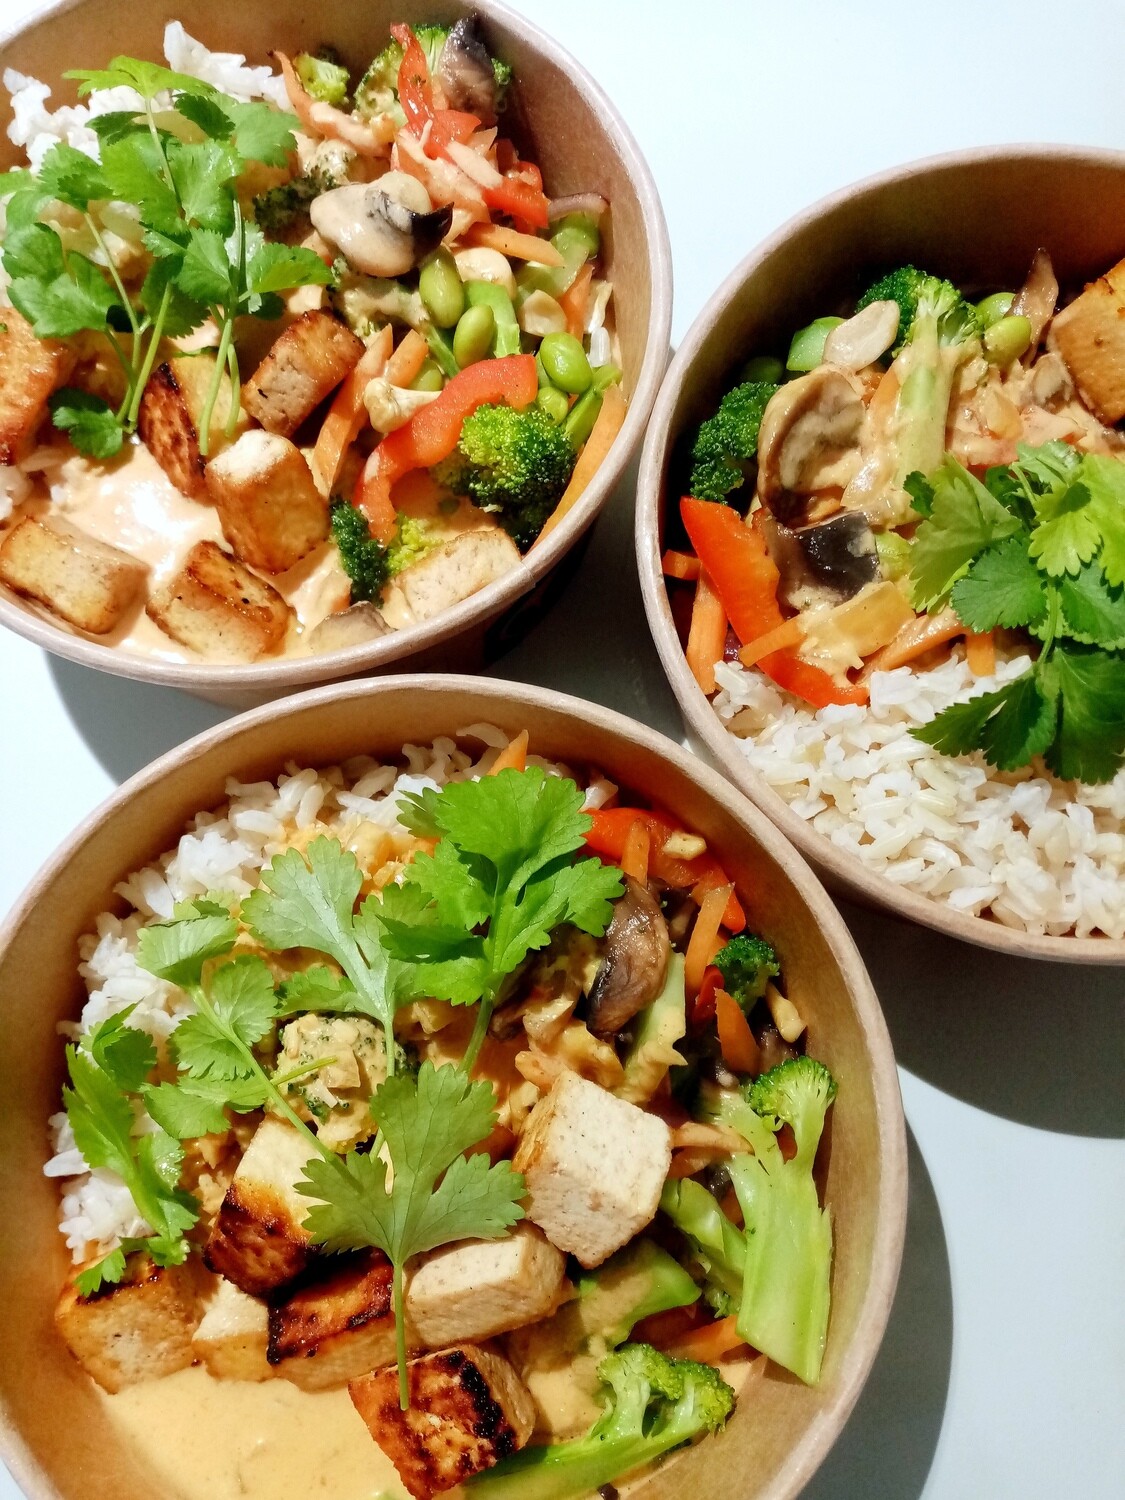 COCONUT RED CURRY mildly spiced. With ginger, seaonal vegetables, organic tofu, brown rice, coriander, cashews. GF, DF